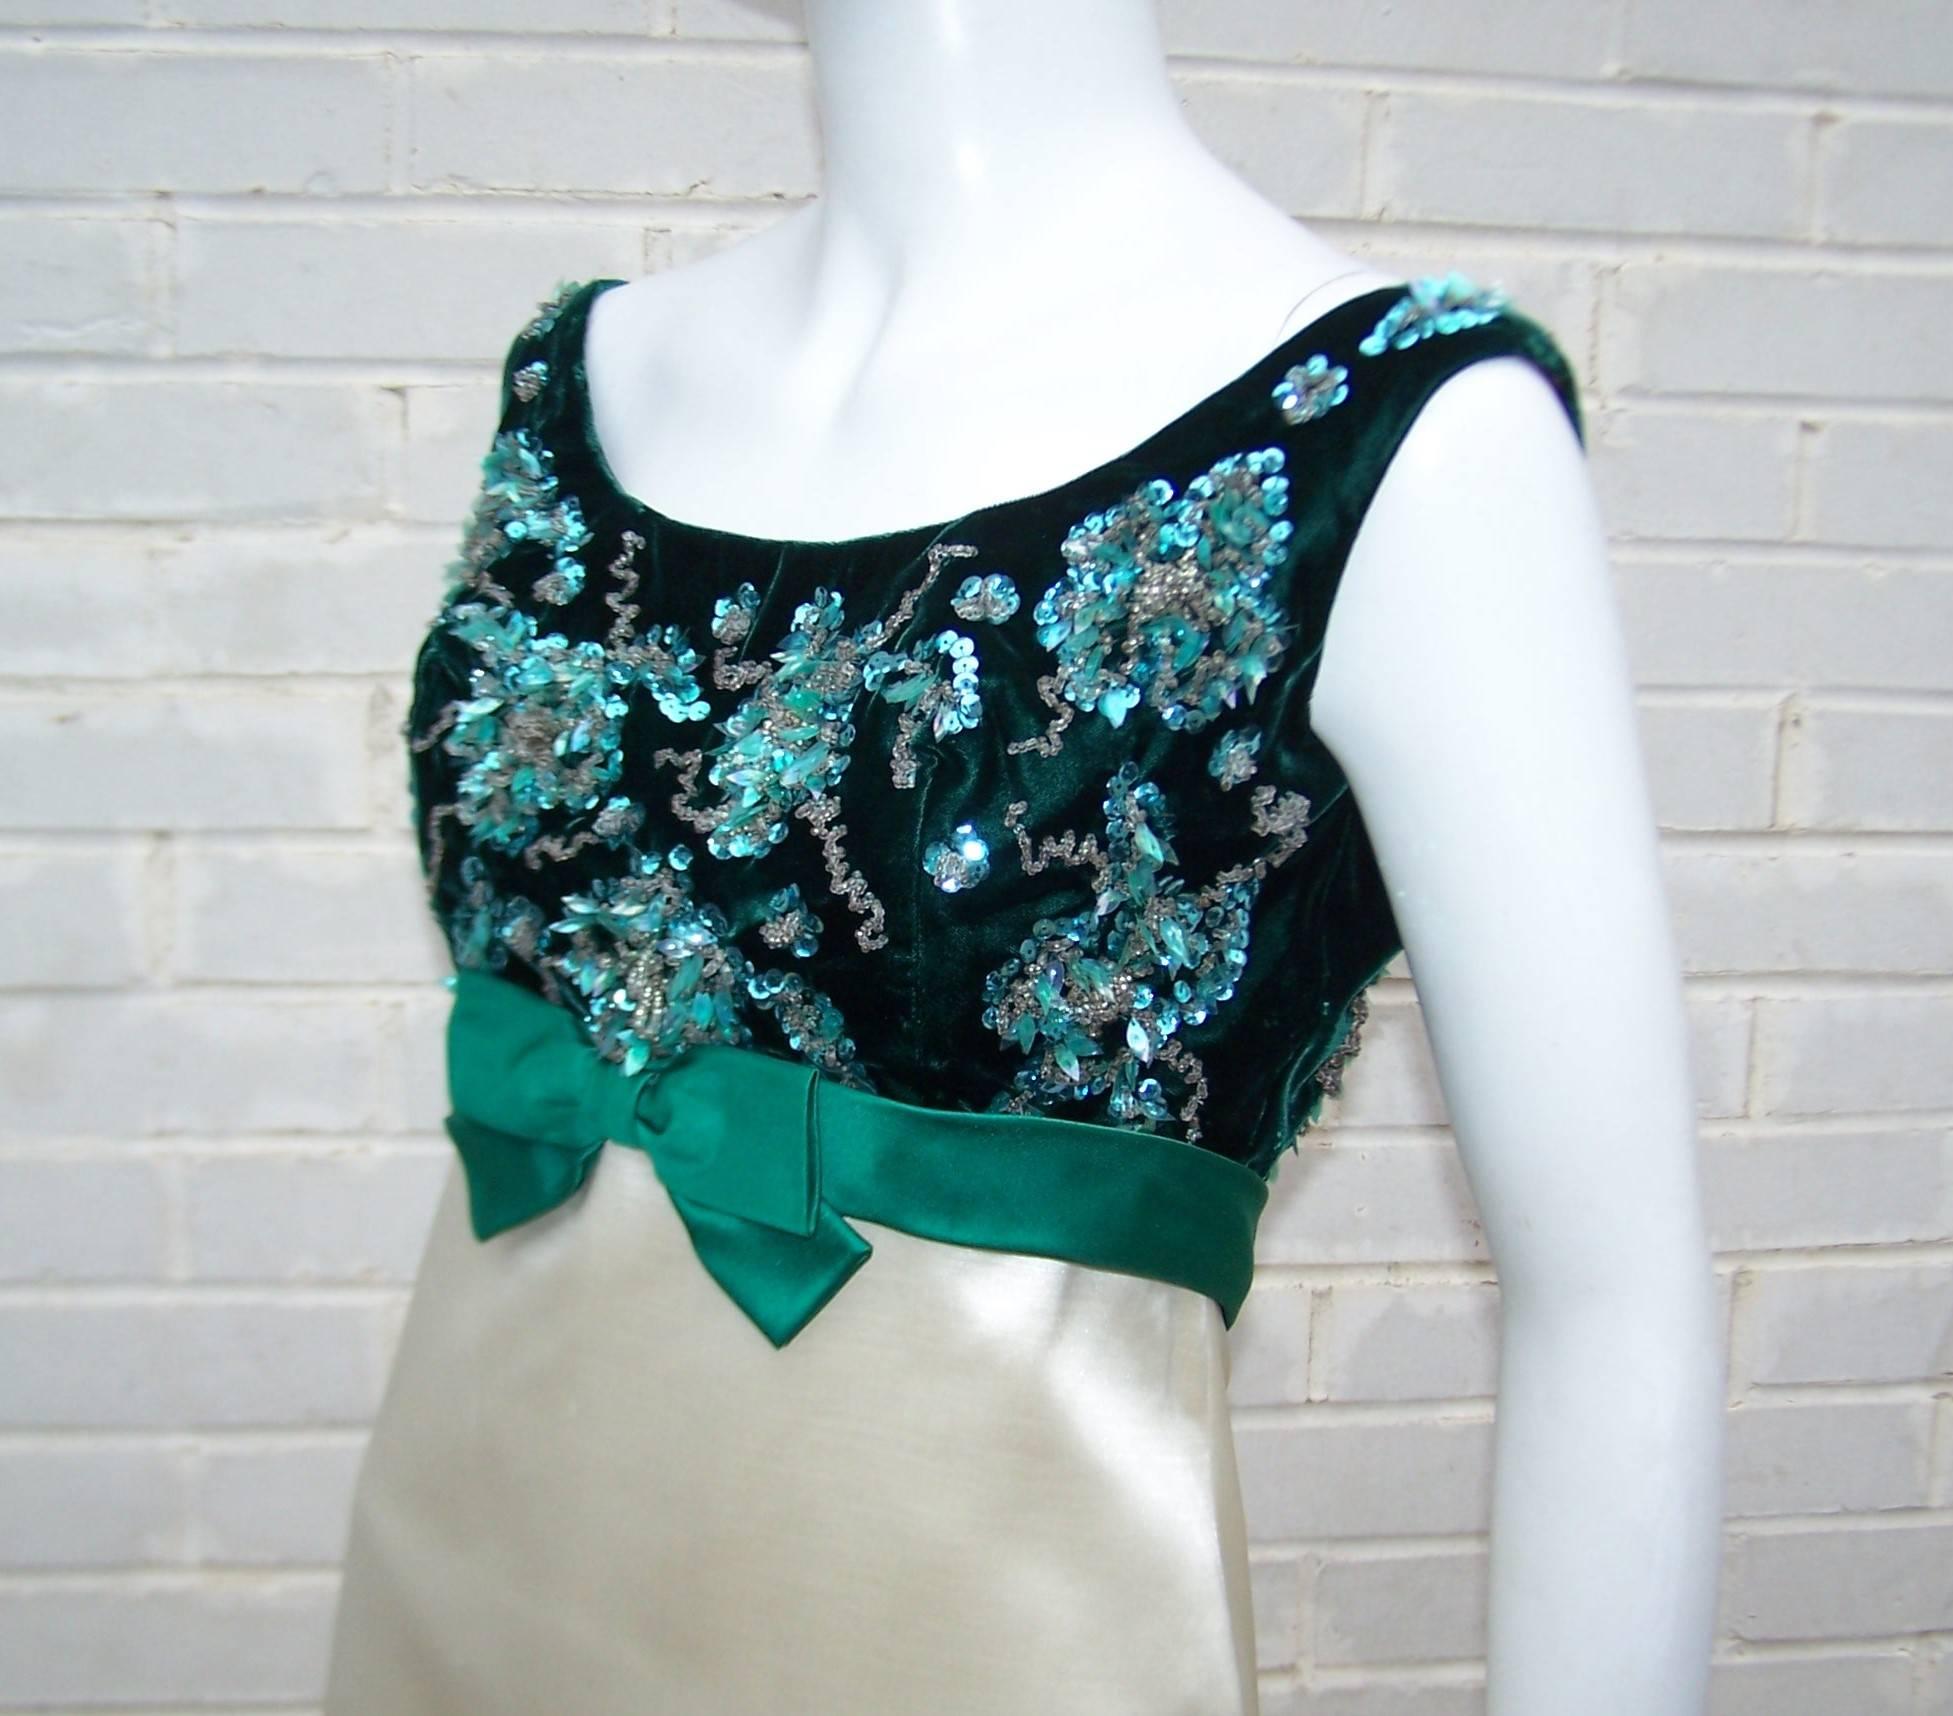 This 1960's evening dress conjures up images of Jackie Kennedy era class and glamour.  The sleeveless empire waist silhouette features a emerald green velvet bodice embellished with aqua green sequins and palettes finished with a satin bow and